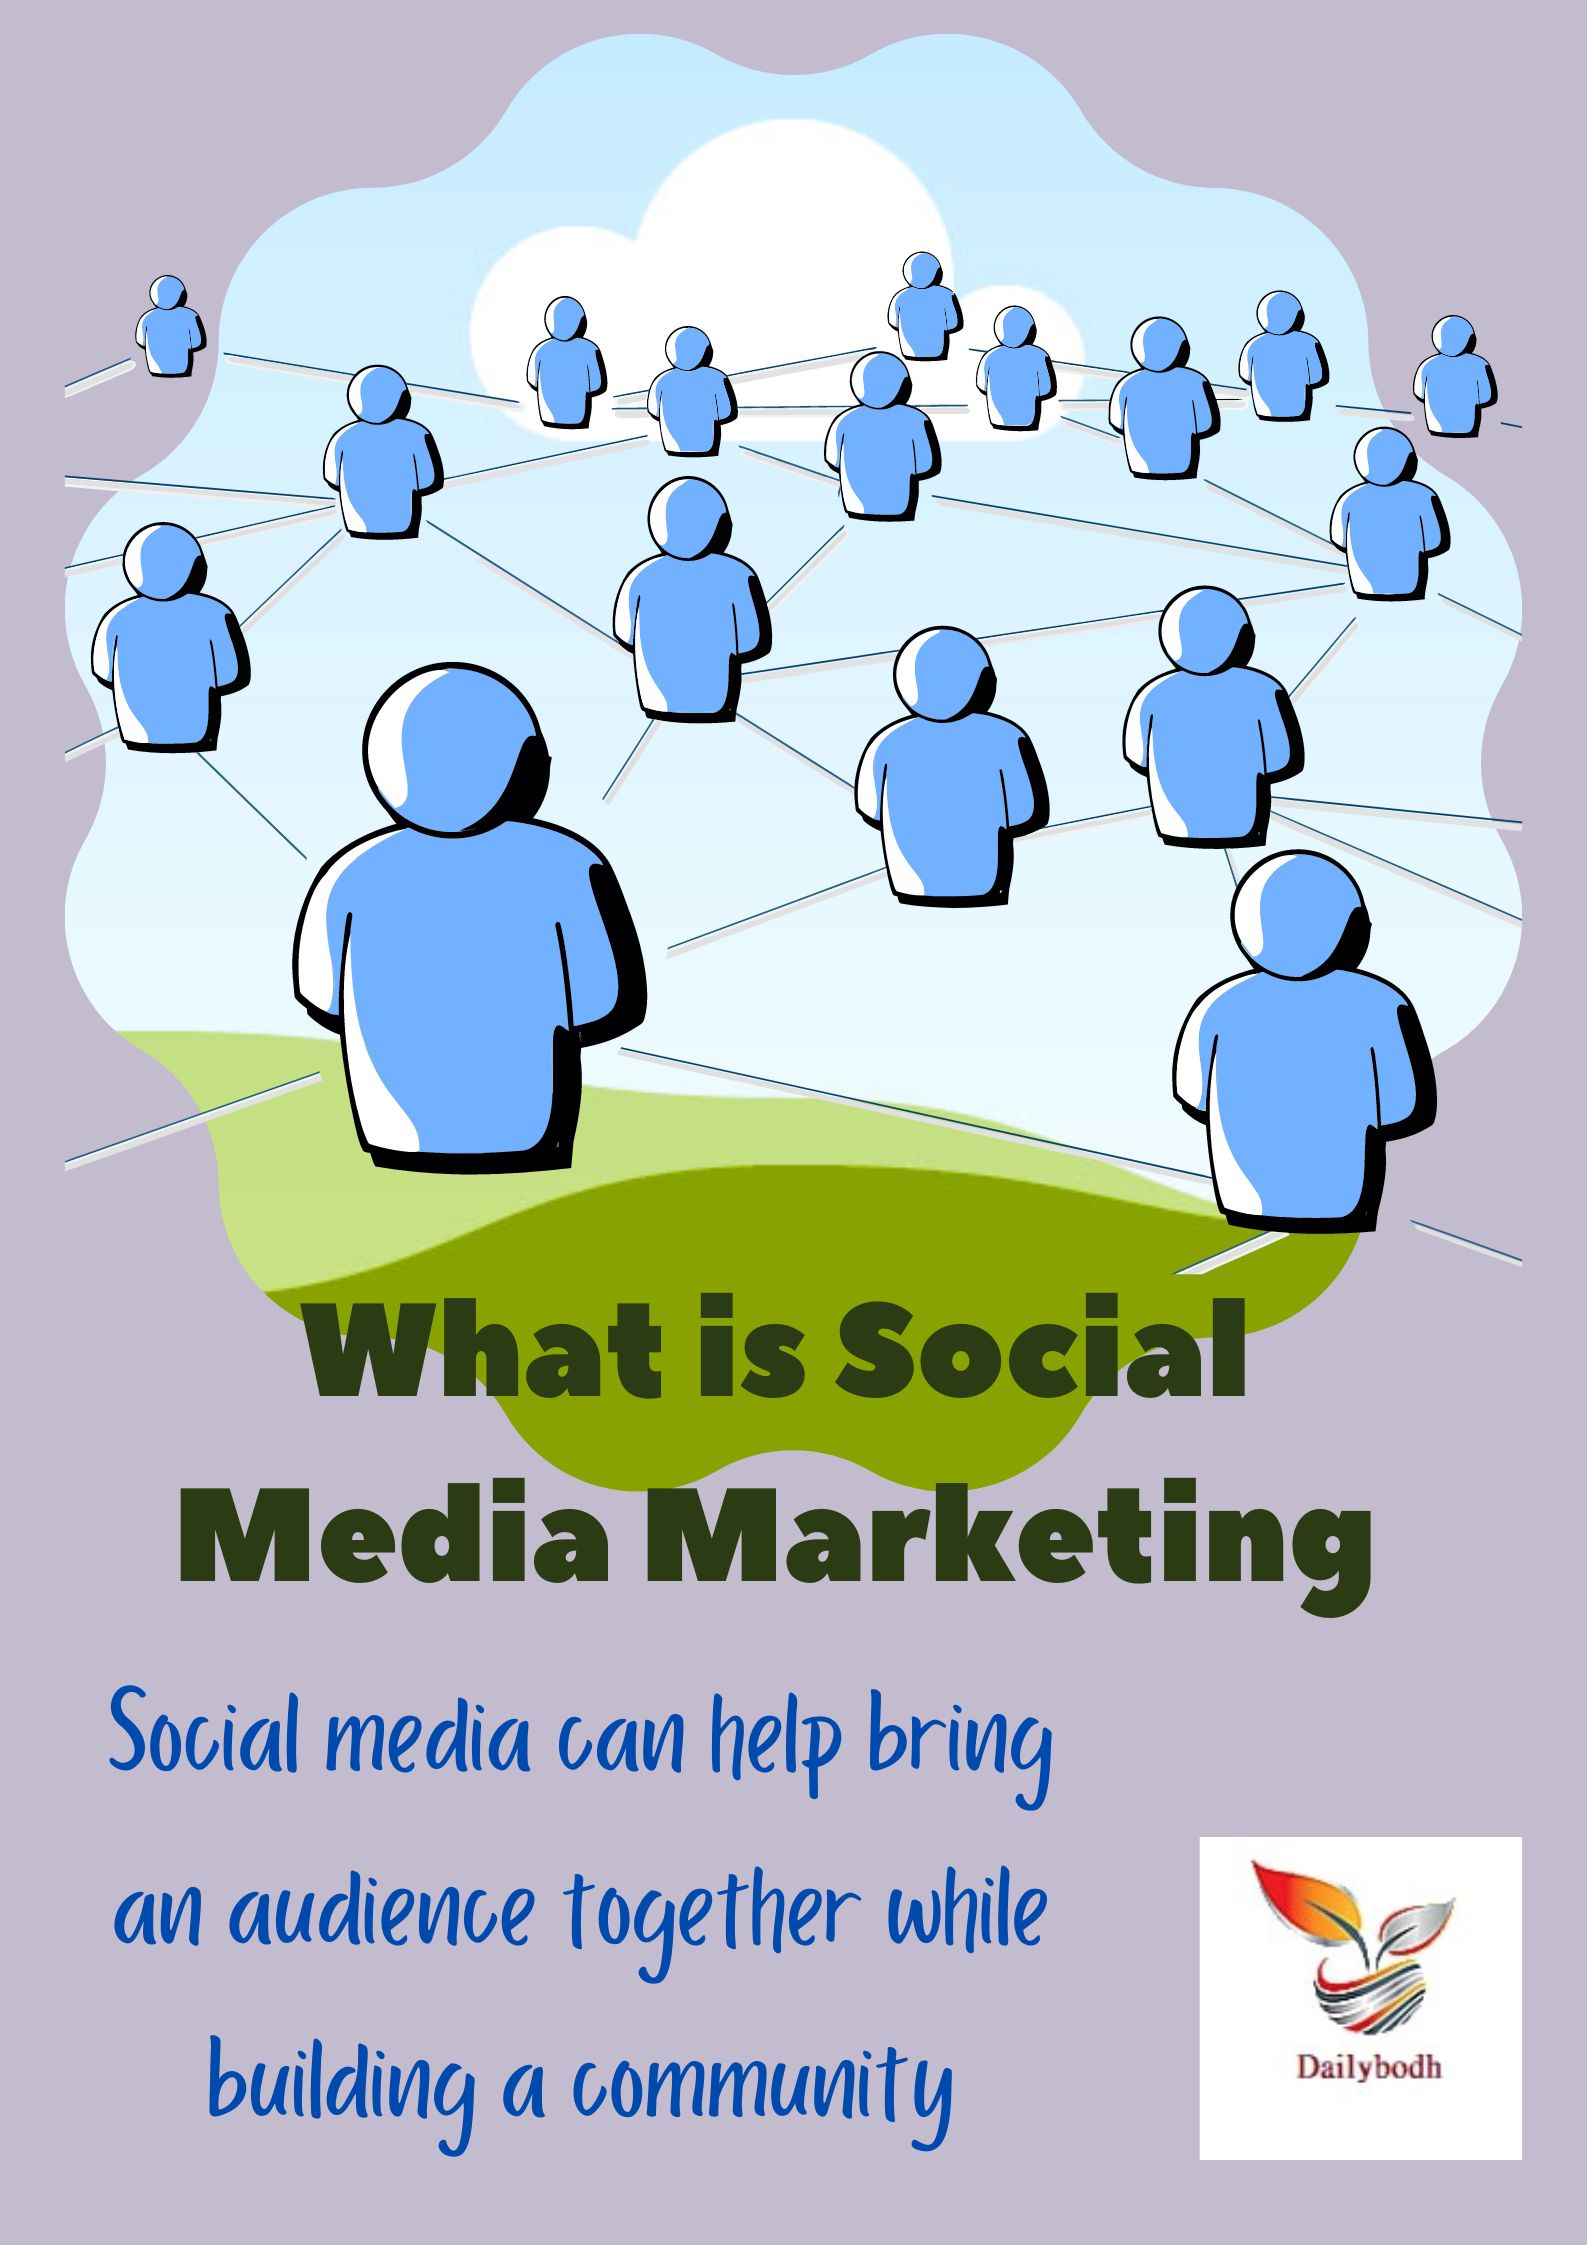 Social media can help bring an audience together while building a community (Social Media Marketing)